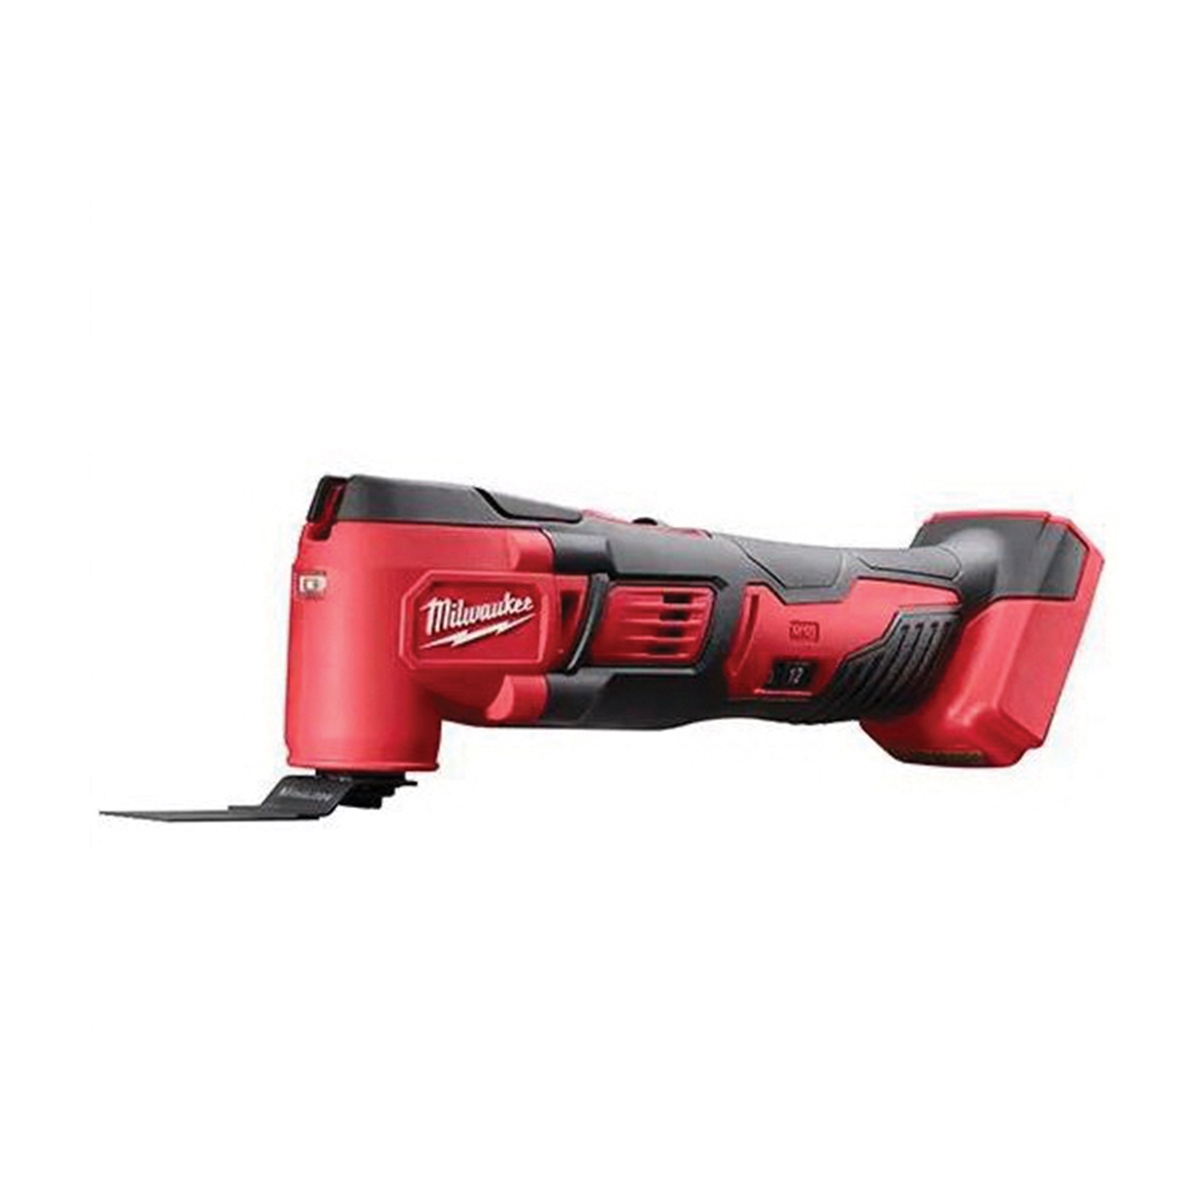 Milwaukee 2626-20 Multi-Tool, Tool Only, 18 V, 11,000 to 18,000 opm - 2